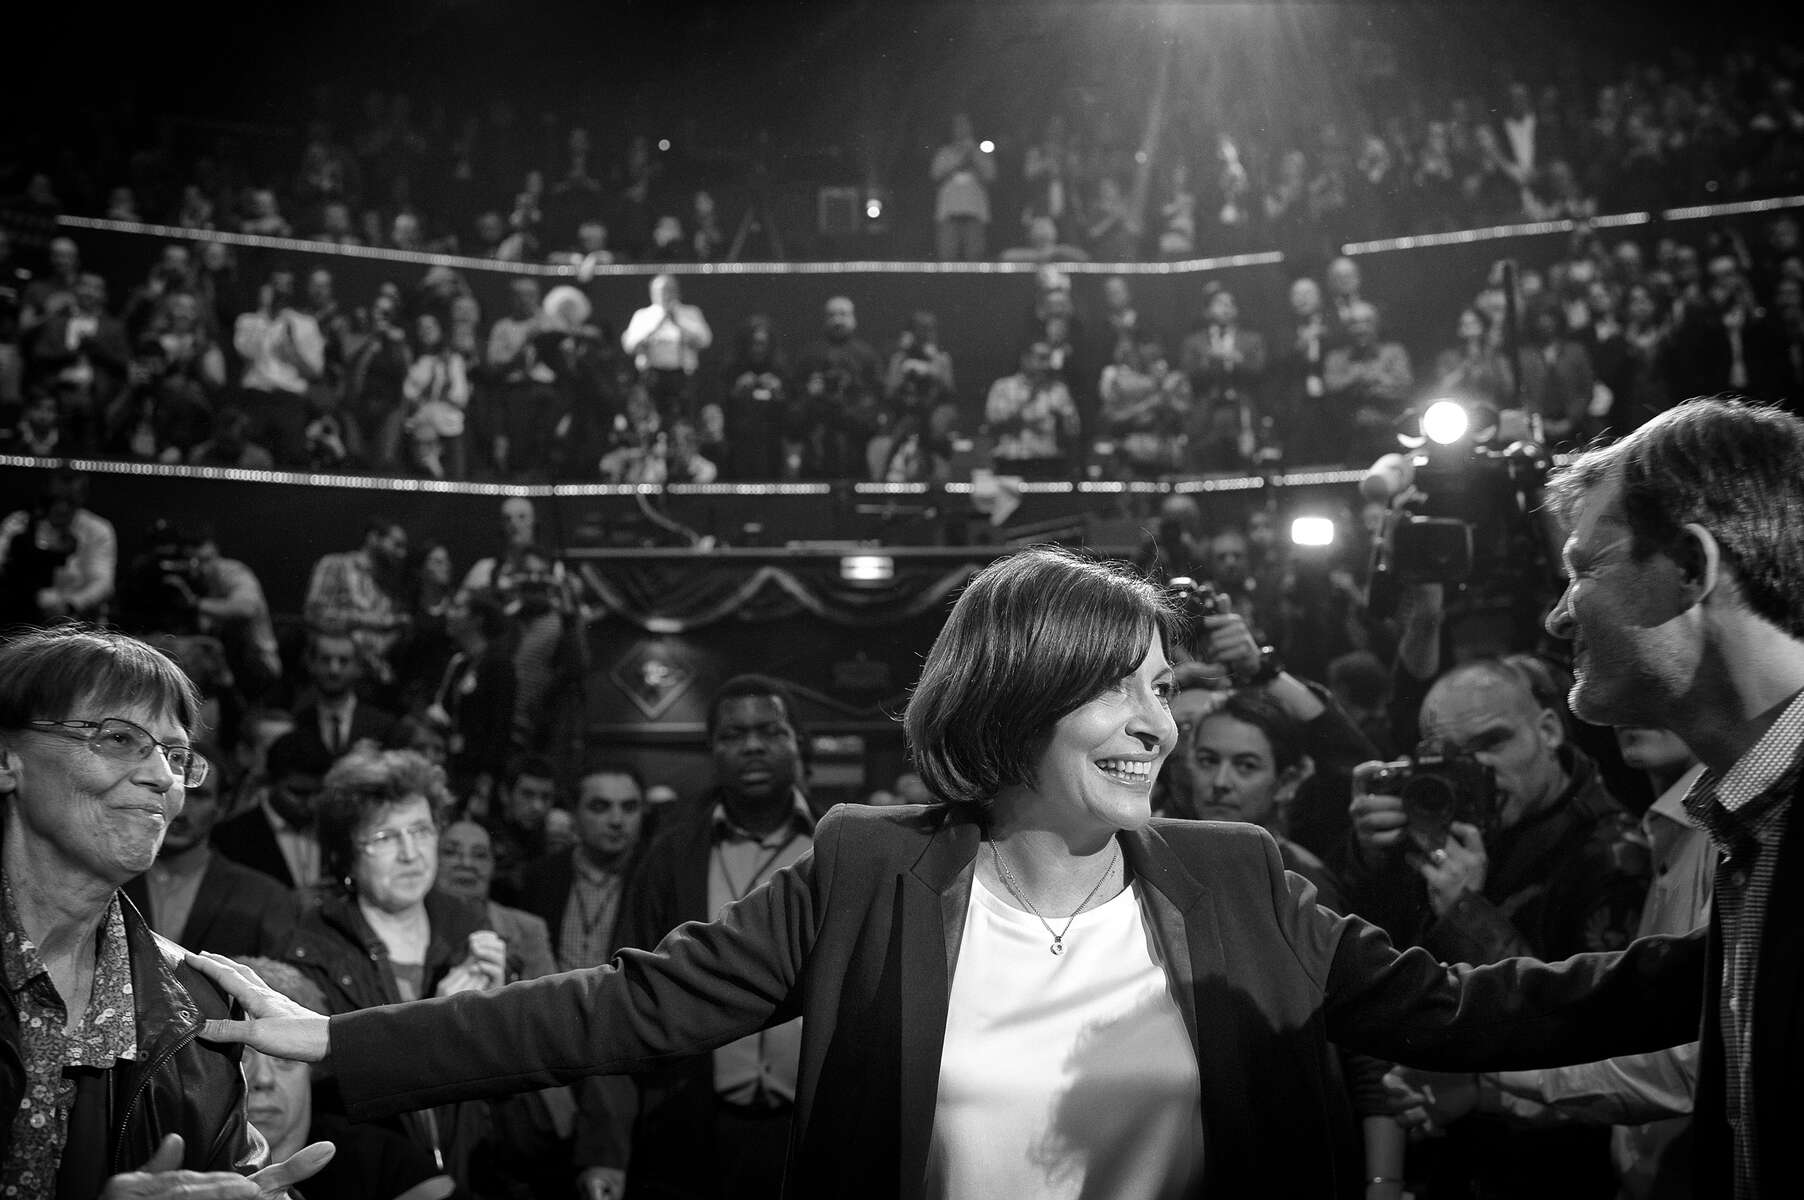 March 13, 2014.  PARIS, FRANCE- Mayoral candidate Anne Hidalgo greets friends and supporters at her big rally at Paris' historic Cirque d'Hiver.  For the first time in France's history, Paris will have a woman as a mayor - either Socialist Anne Hidalgo or Center-Right Nathalie Kosciusko-Morizet.  Photo by Scout Tufankjian